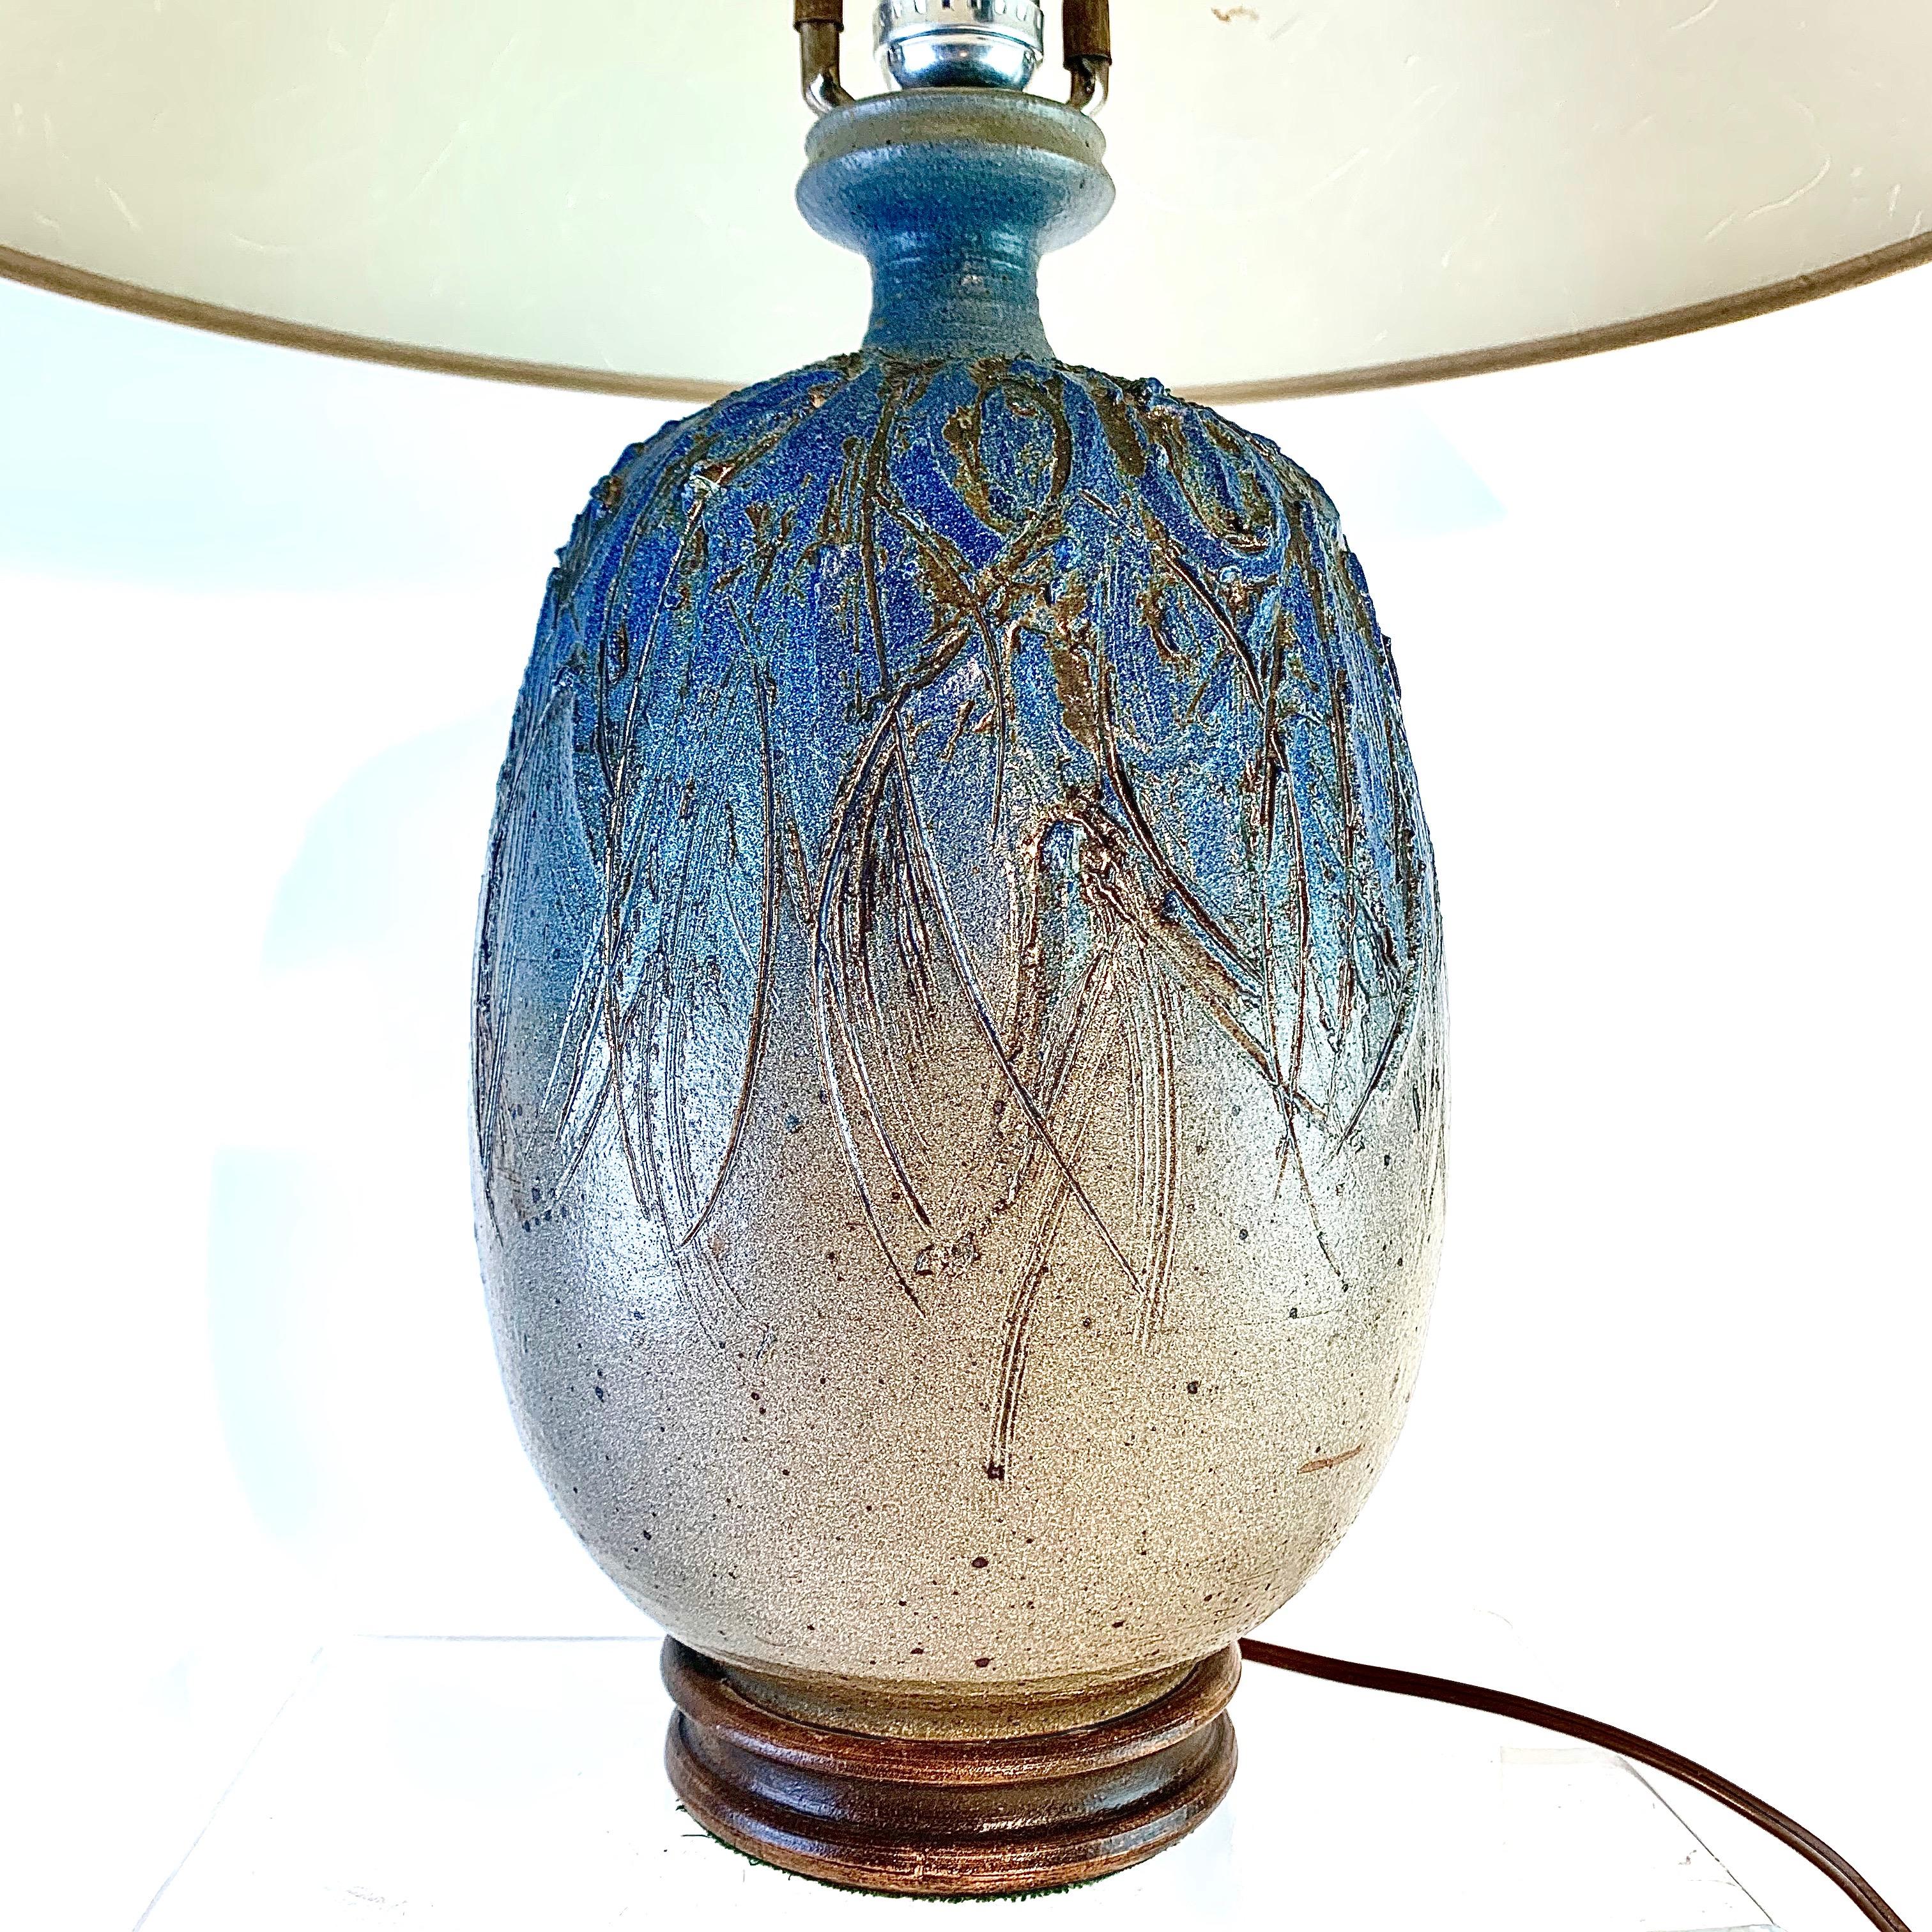 A glazed and artfully incised stoneware table lamp, circa 1960s, by Middleboro, Massachusetts artist John Moakley (1931-2002). Moakley was a well respected modernist potter who taught in the Boston area and exhibited at the Nationals throughout the